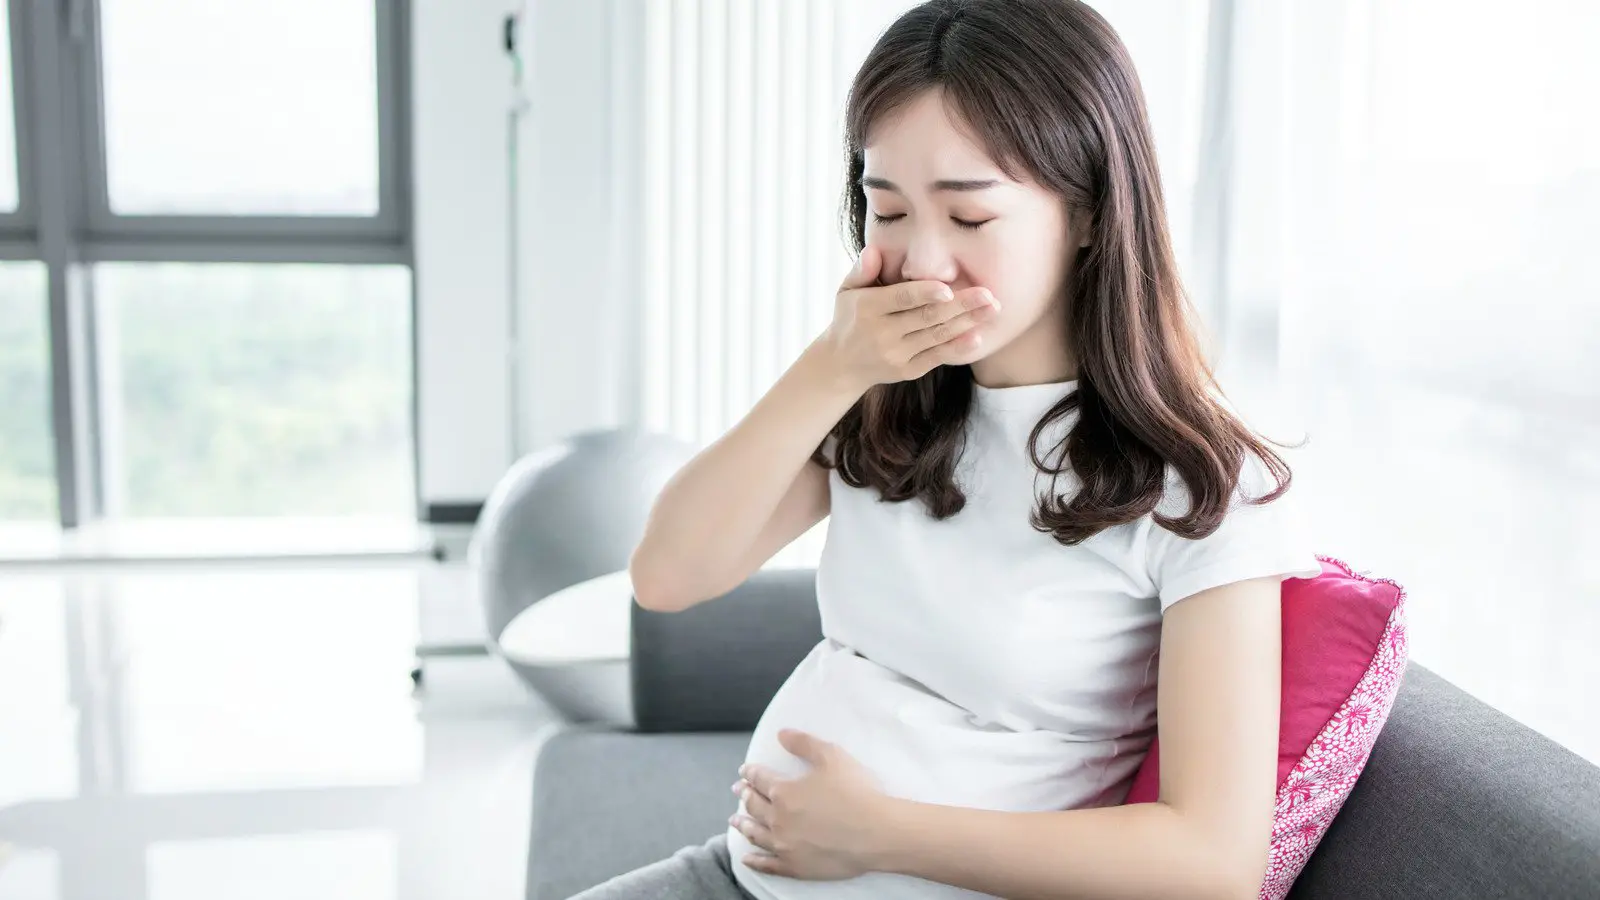 What You Should Do If You Feel Nauseous While Pregnant